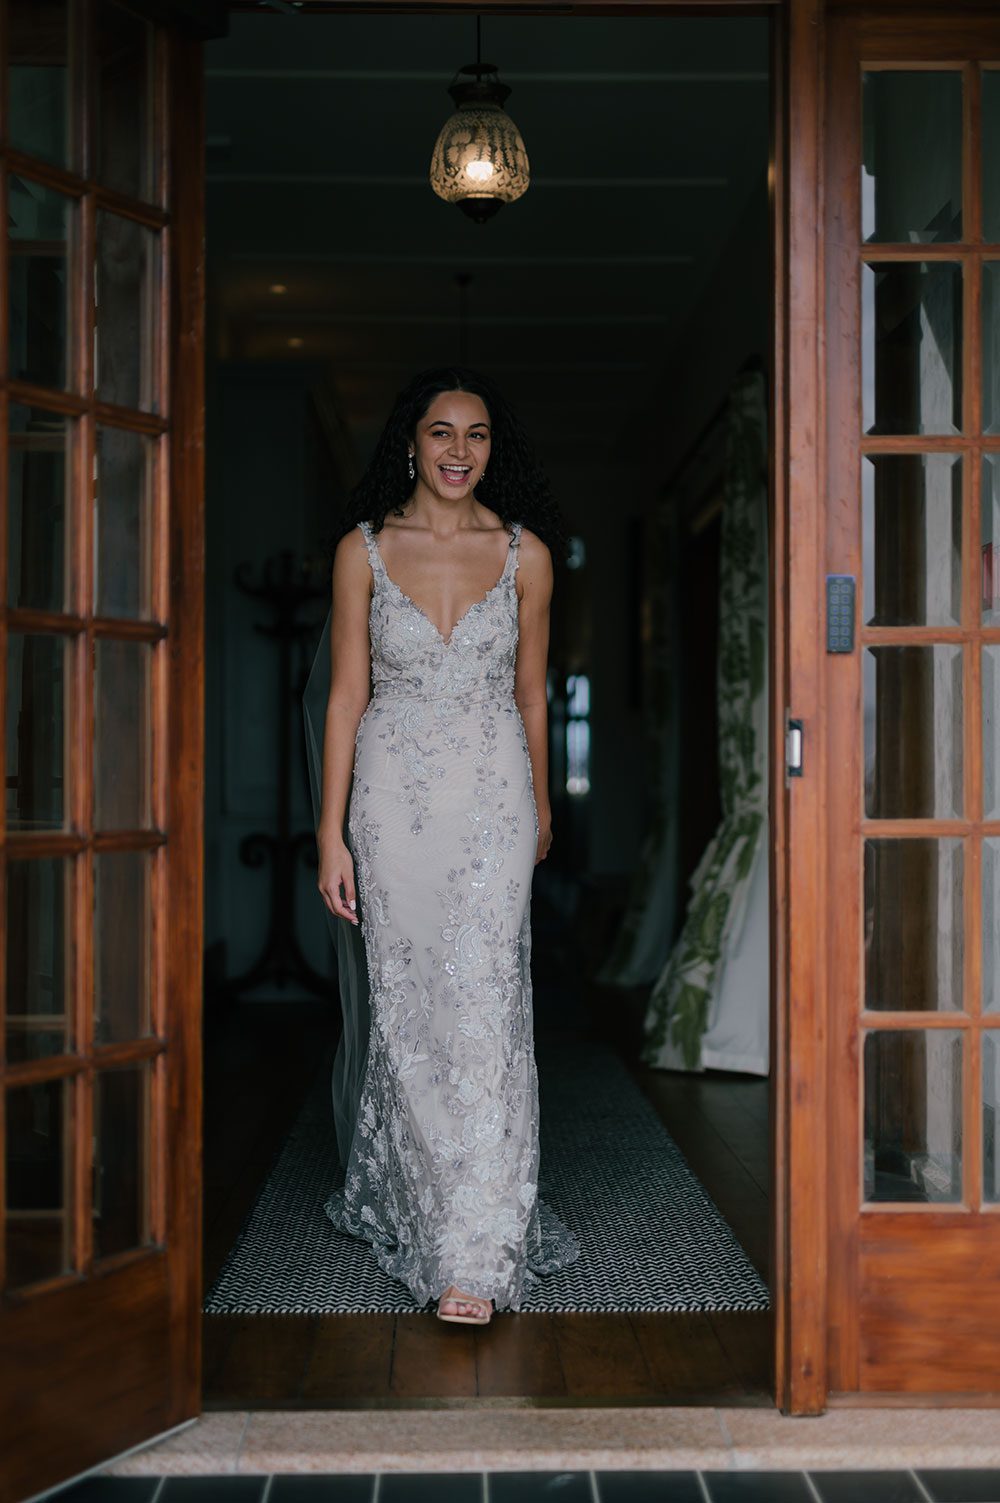 Bride wearing Kazumi Gown in soft grey with hand embellished lace and a low back - in doorway